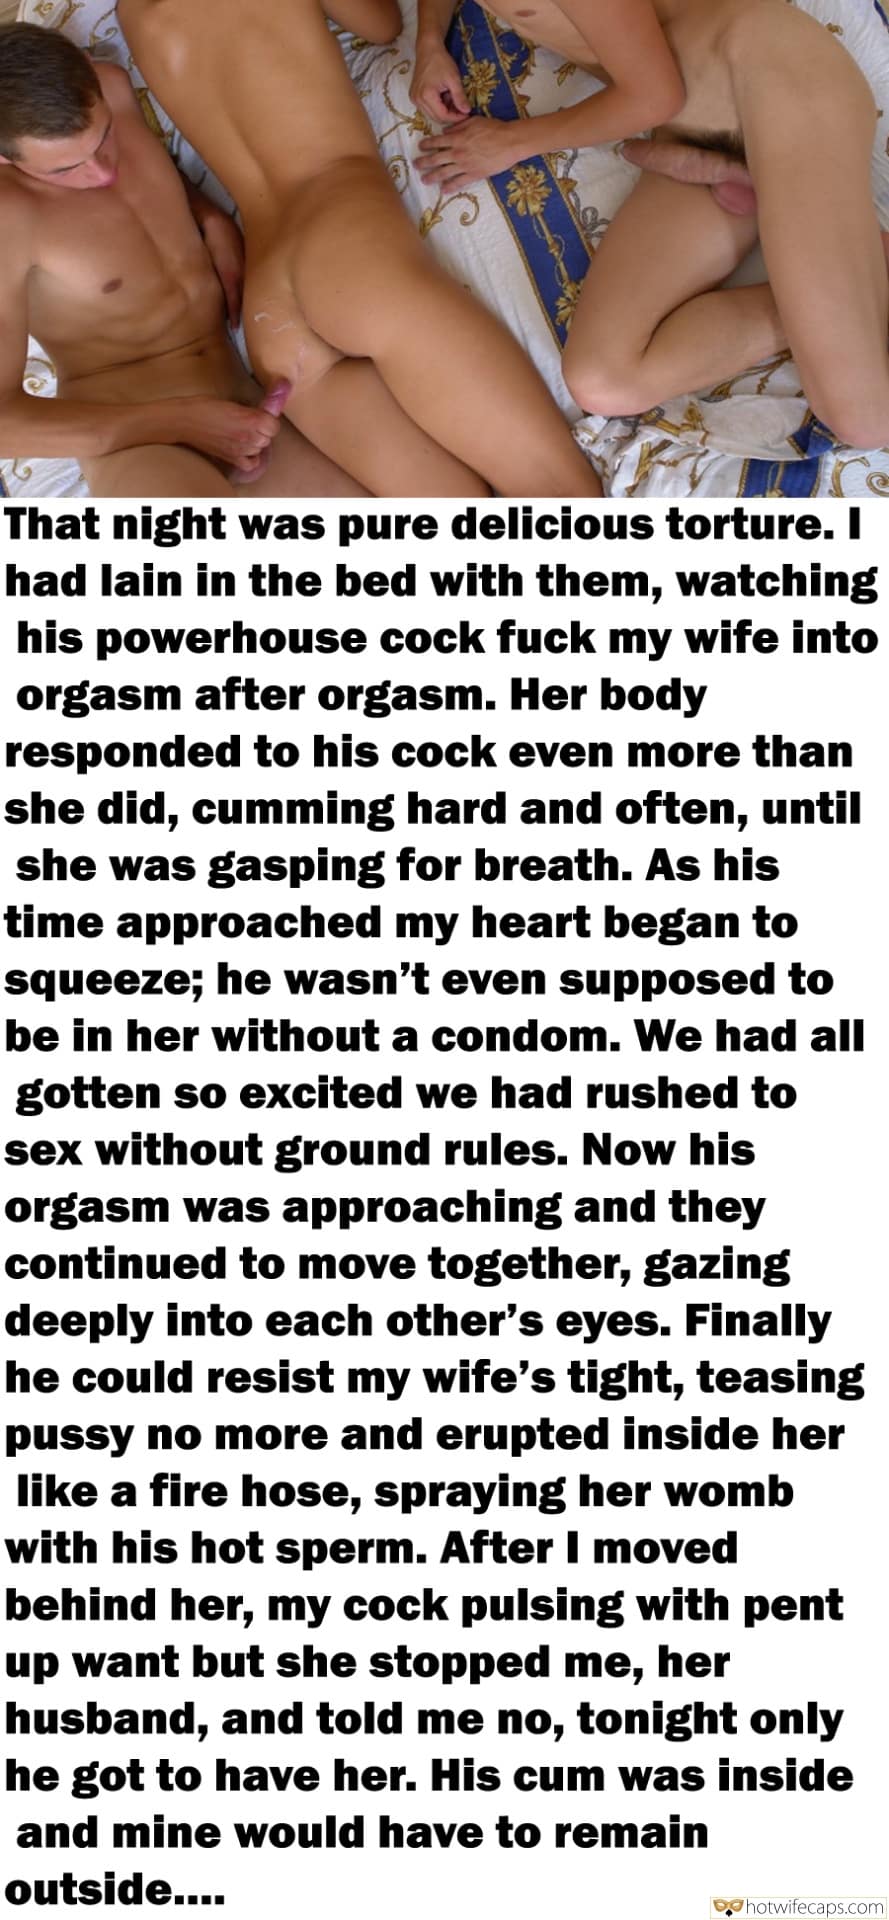 Wife Sharing Threesome Impregnation hotwife caption: That night was pure delicious torture. I had lain in the bed with them, watching his powerhouse cock fuck my wife into orgasm after orgasm. Her body responded to his cock even more than she did, cumming hard and often,...